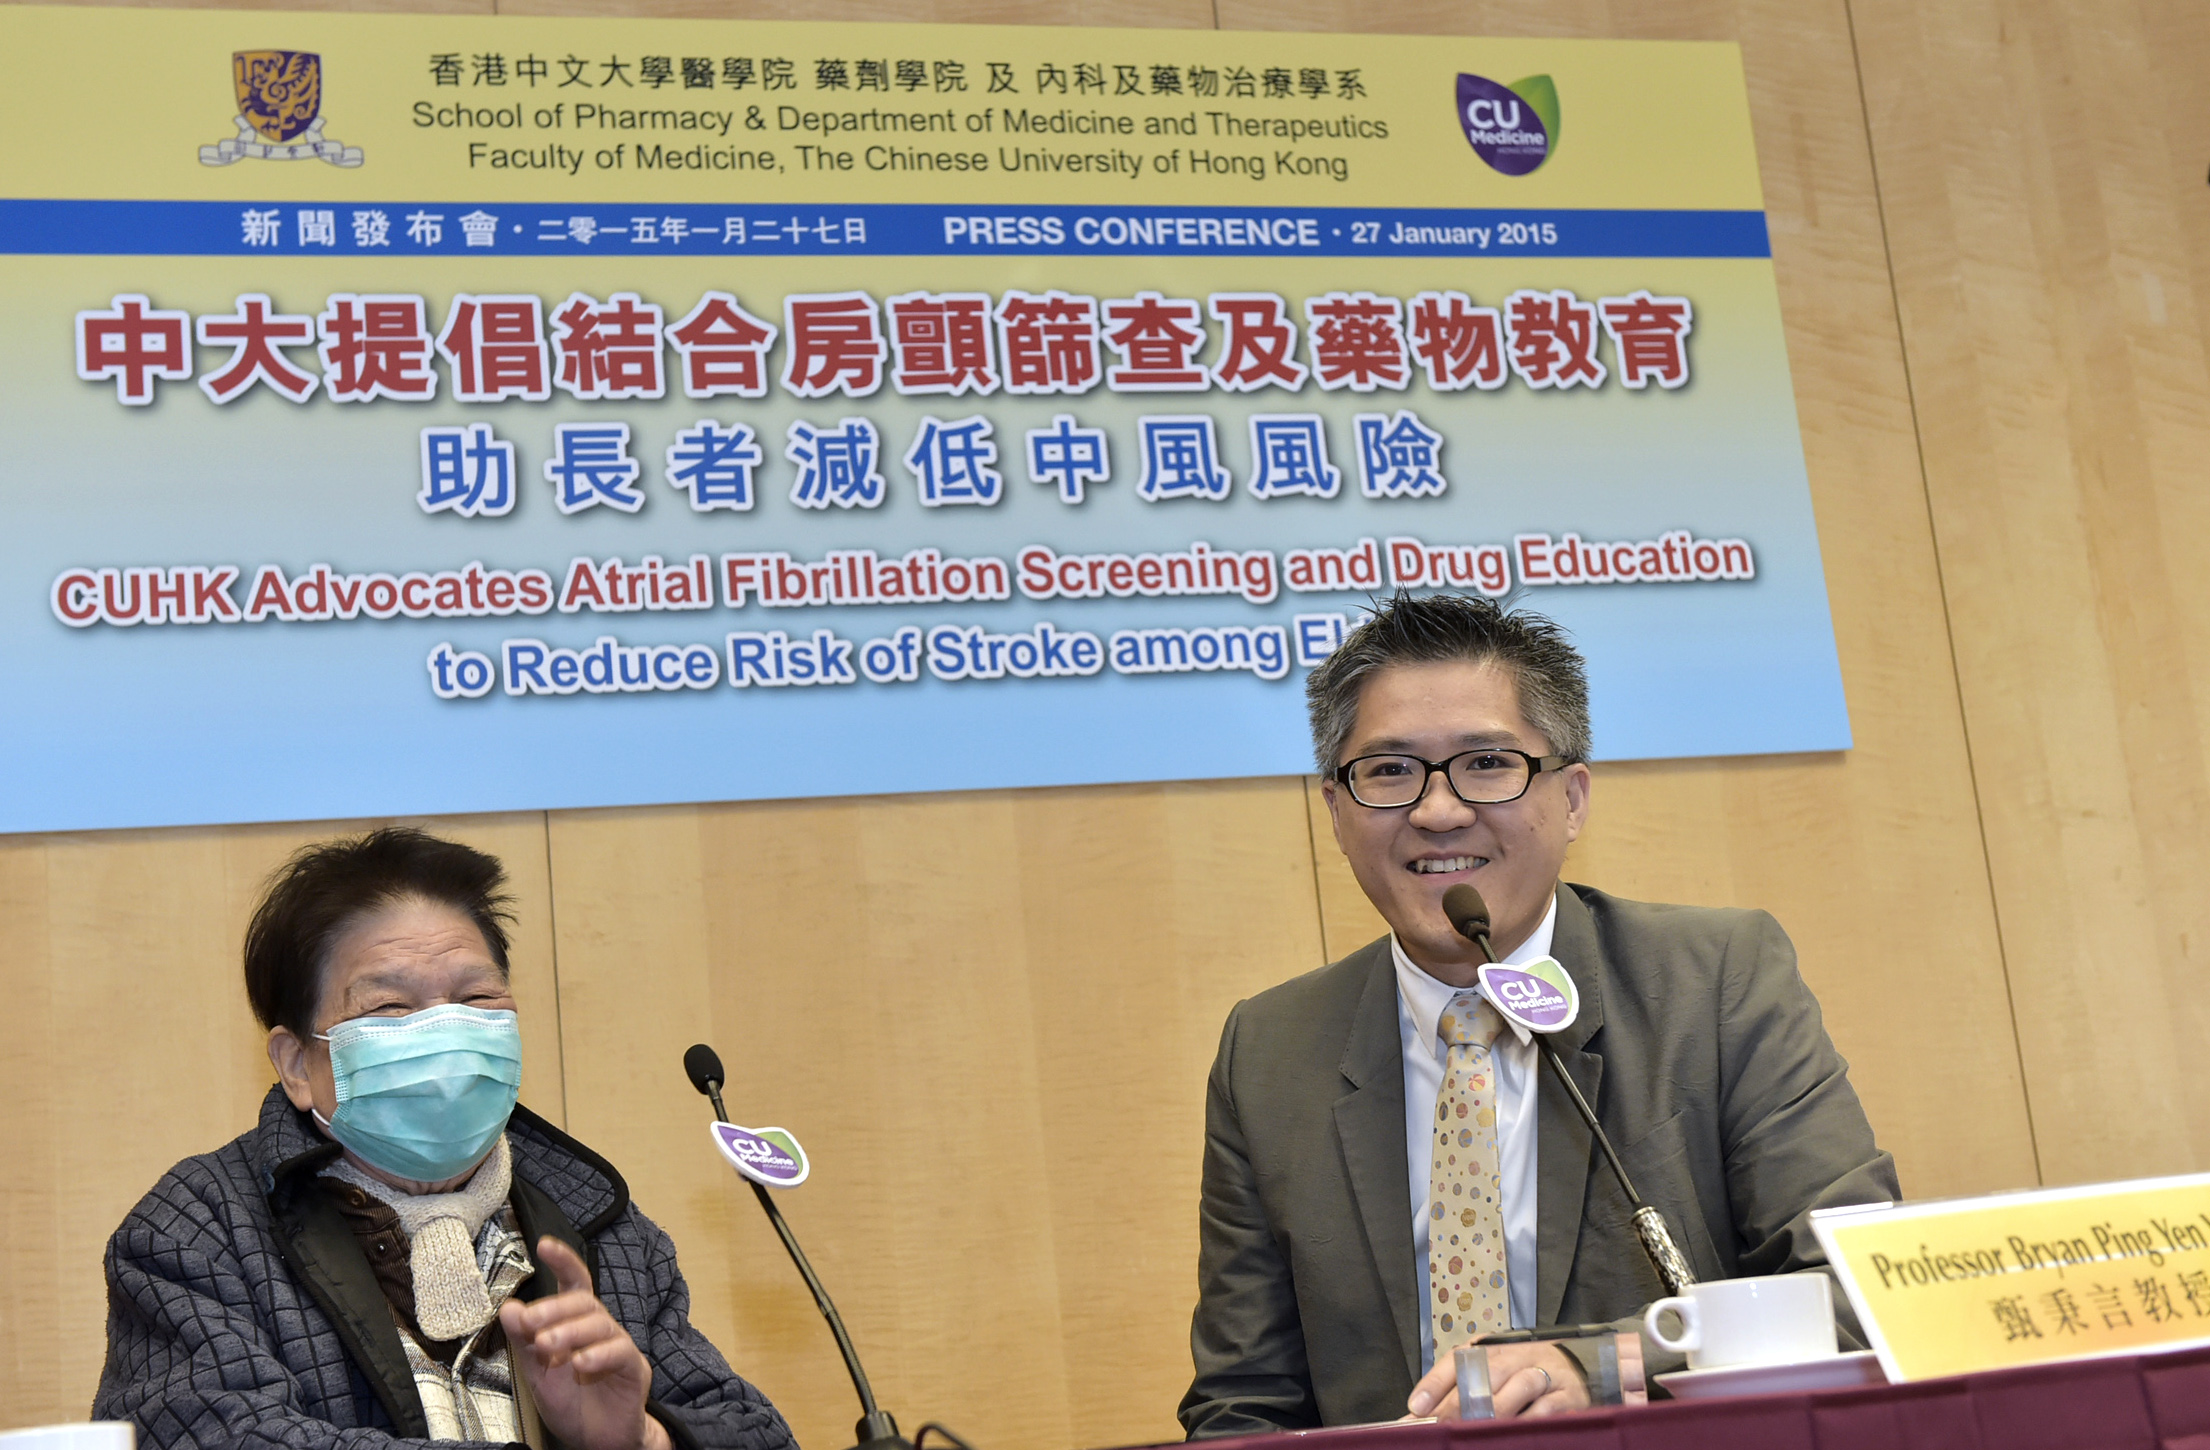 Ms. Tsui (left), aged 80, suffers from atrial fibrillation